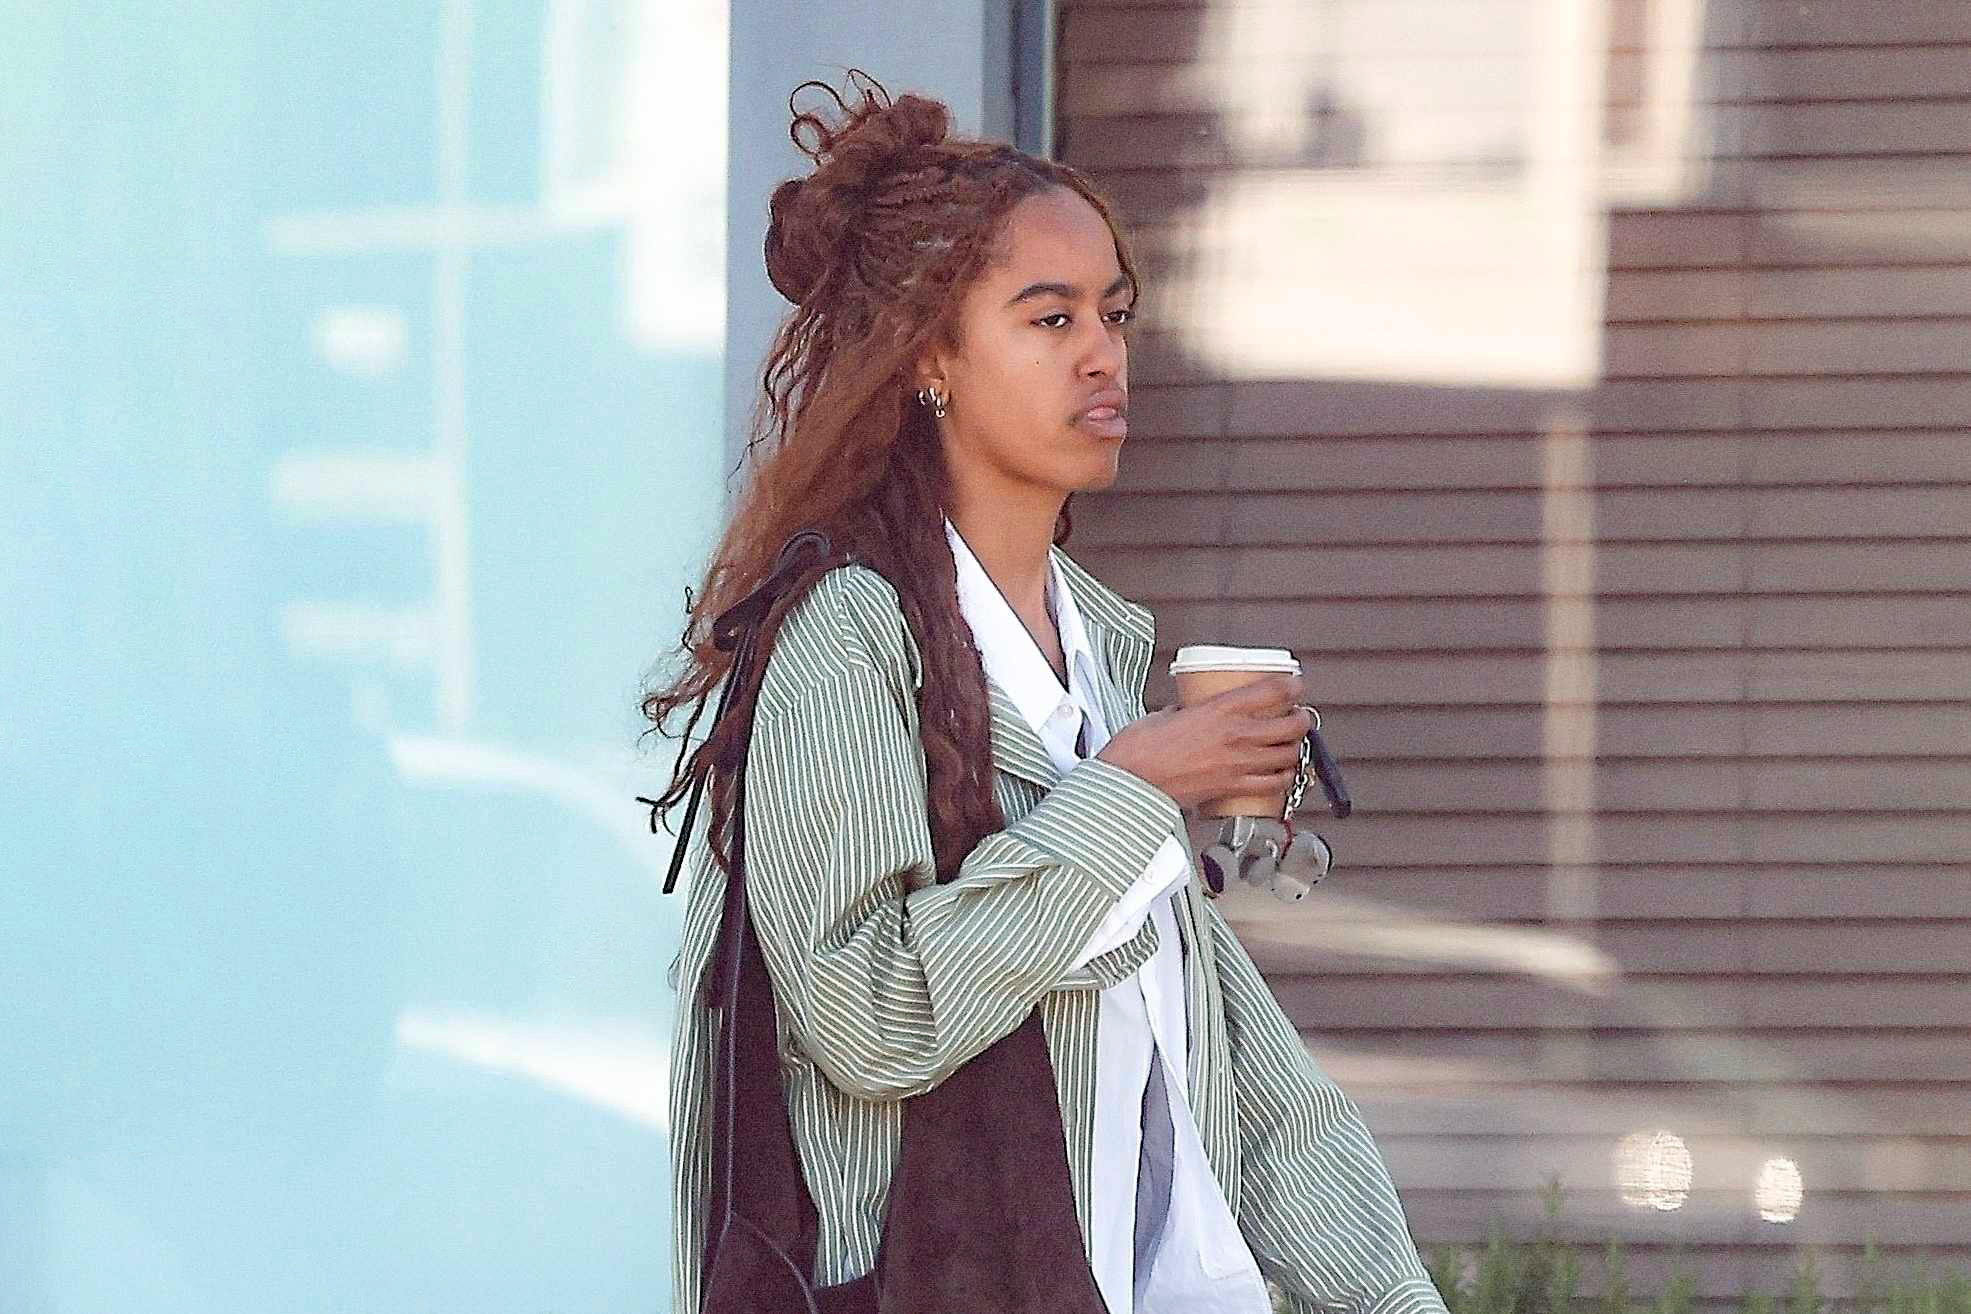 Malia Obama seen in Los Angeles attending an acting class with a striped shirt, white shirt, blue jeans, and black shoes